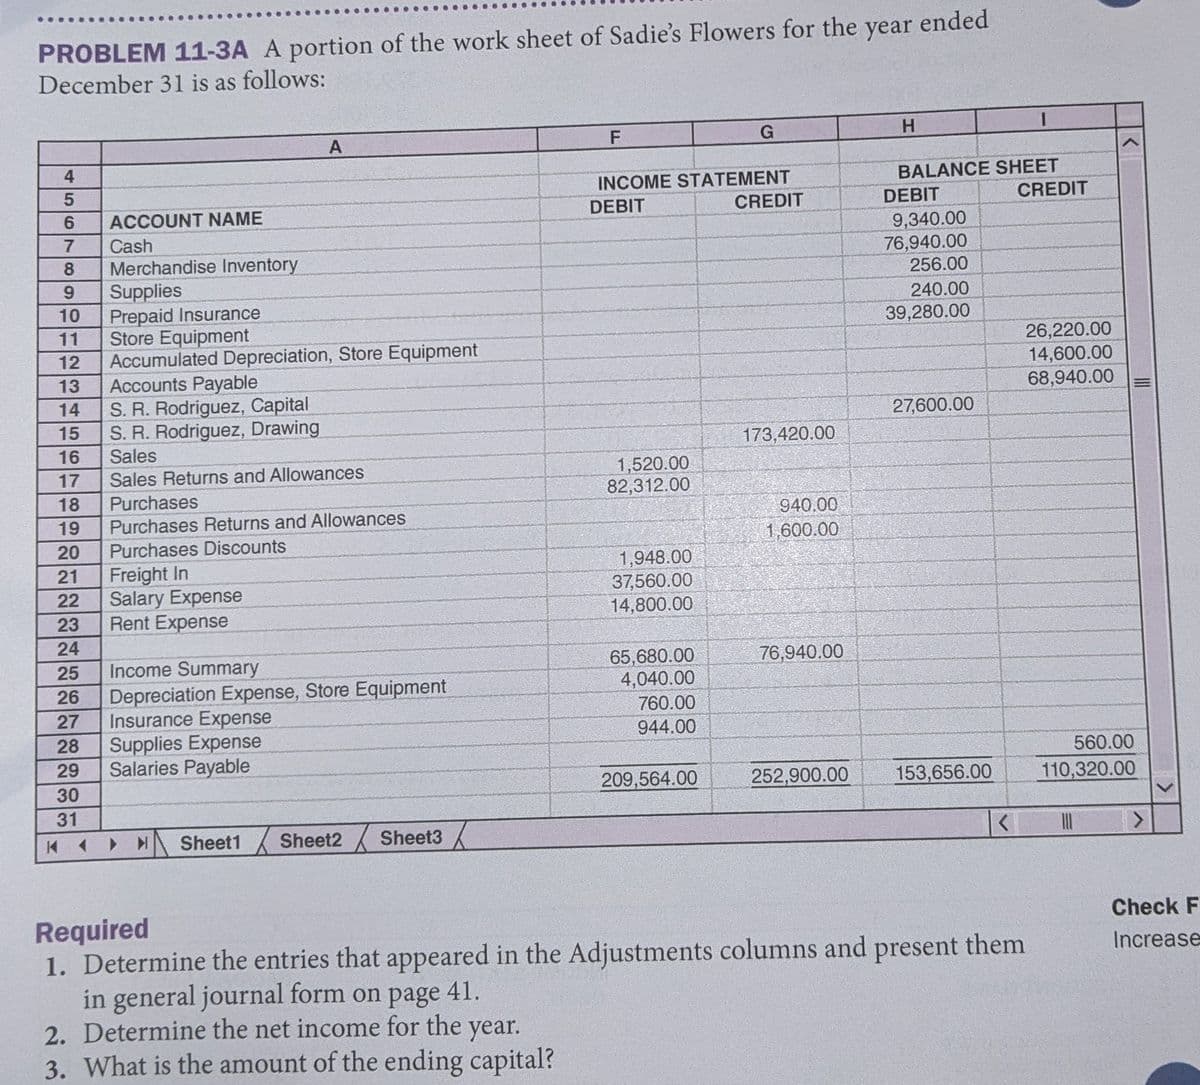 ....
PROBLEM 11-3A A portion of the work sheet of Sadie's Flowers for the
December 31 is as follows:
year
ended
G
H.
A
INCOME STATEMENT
CREDIT
BALANCE SHEET
CREDIT
DEBIT
DEBIT
6.
Cash
Merchandise Inventory
Supplies
10
ACCOUNT NAME
9,340.00
76,940.00
256.00
8
9
Prepaid Insurance
11
240.00
39,280.00
Store Equipment
12
Accumulated Depreciation, Store Equipment
Accounts Payable
S. R. Rodriguez, Capital
15
26,220.00
14,600.00
68,940.00
13
14
27,600.00
S. R. Rodriguez, Drawing
Sales
173,420.00
16
1,520.00
82,312.00
17
Sales Returns and Allowances
18
Purchases
940.00
19
Purchases Returns and Allowances
20
Purchases Discounts
1,600.00
1,948.00
37,560.00
14,800.00
21
Freight In
22
Salary Expense
23
Rent Expense
24
76,940.00
Income Summary
Depreciation Expense, Store Equipment
Insurance Expense
Supplies Expense
Salaries Payable
65,680.00
4,040.00
760.00
25
26
27
944.00
28
560.00
29
30
209,564.00
252,900.00
153,656.00
110,320.00
31
Sheet1
Sheet2 Sheet3
Required
1. Determine the entries that appeared in the Adjustments columns and present them
in general journal form on page 41.
2. Determine the net income for the year.
3. What is the amount of the ending capital?
Check F
Increase
45
